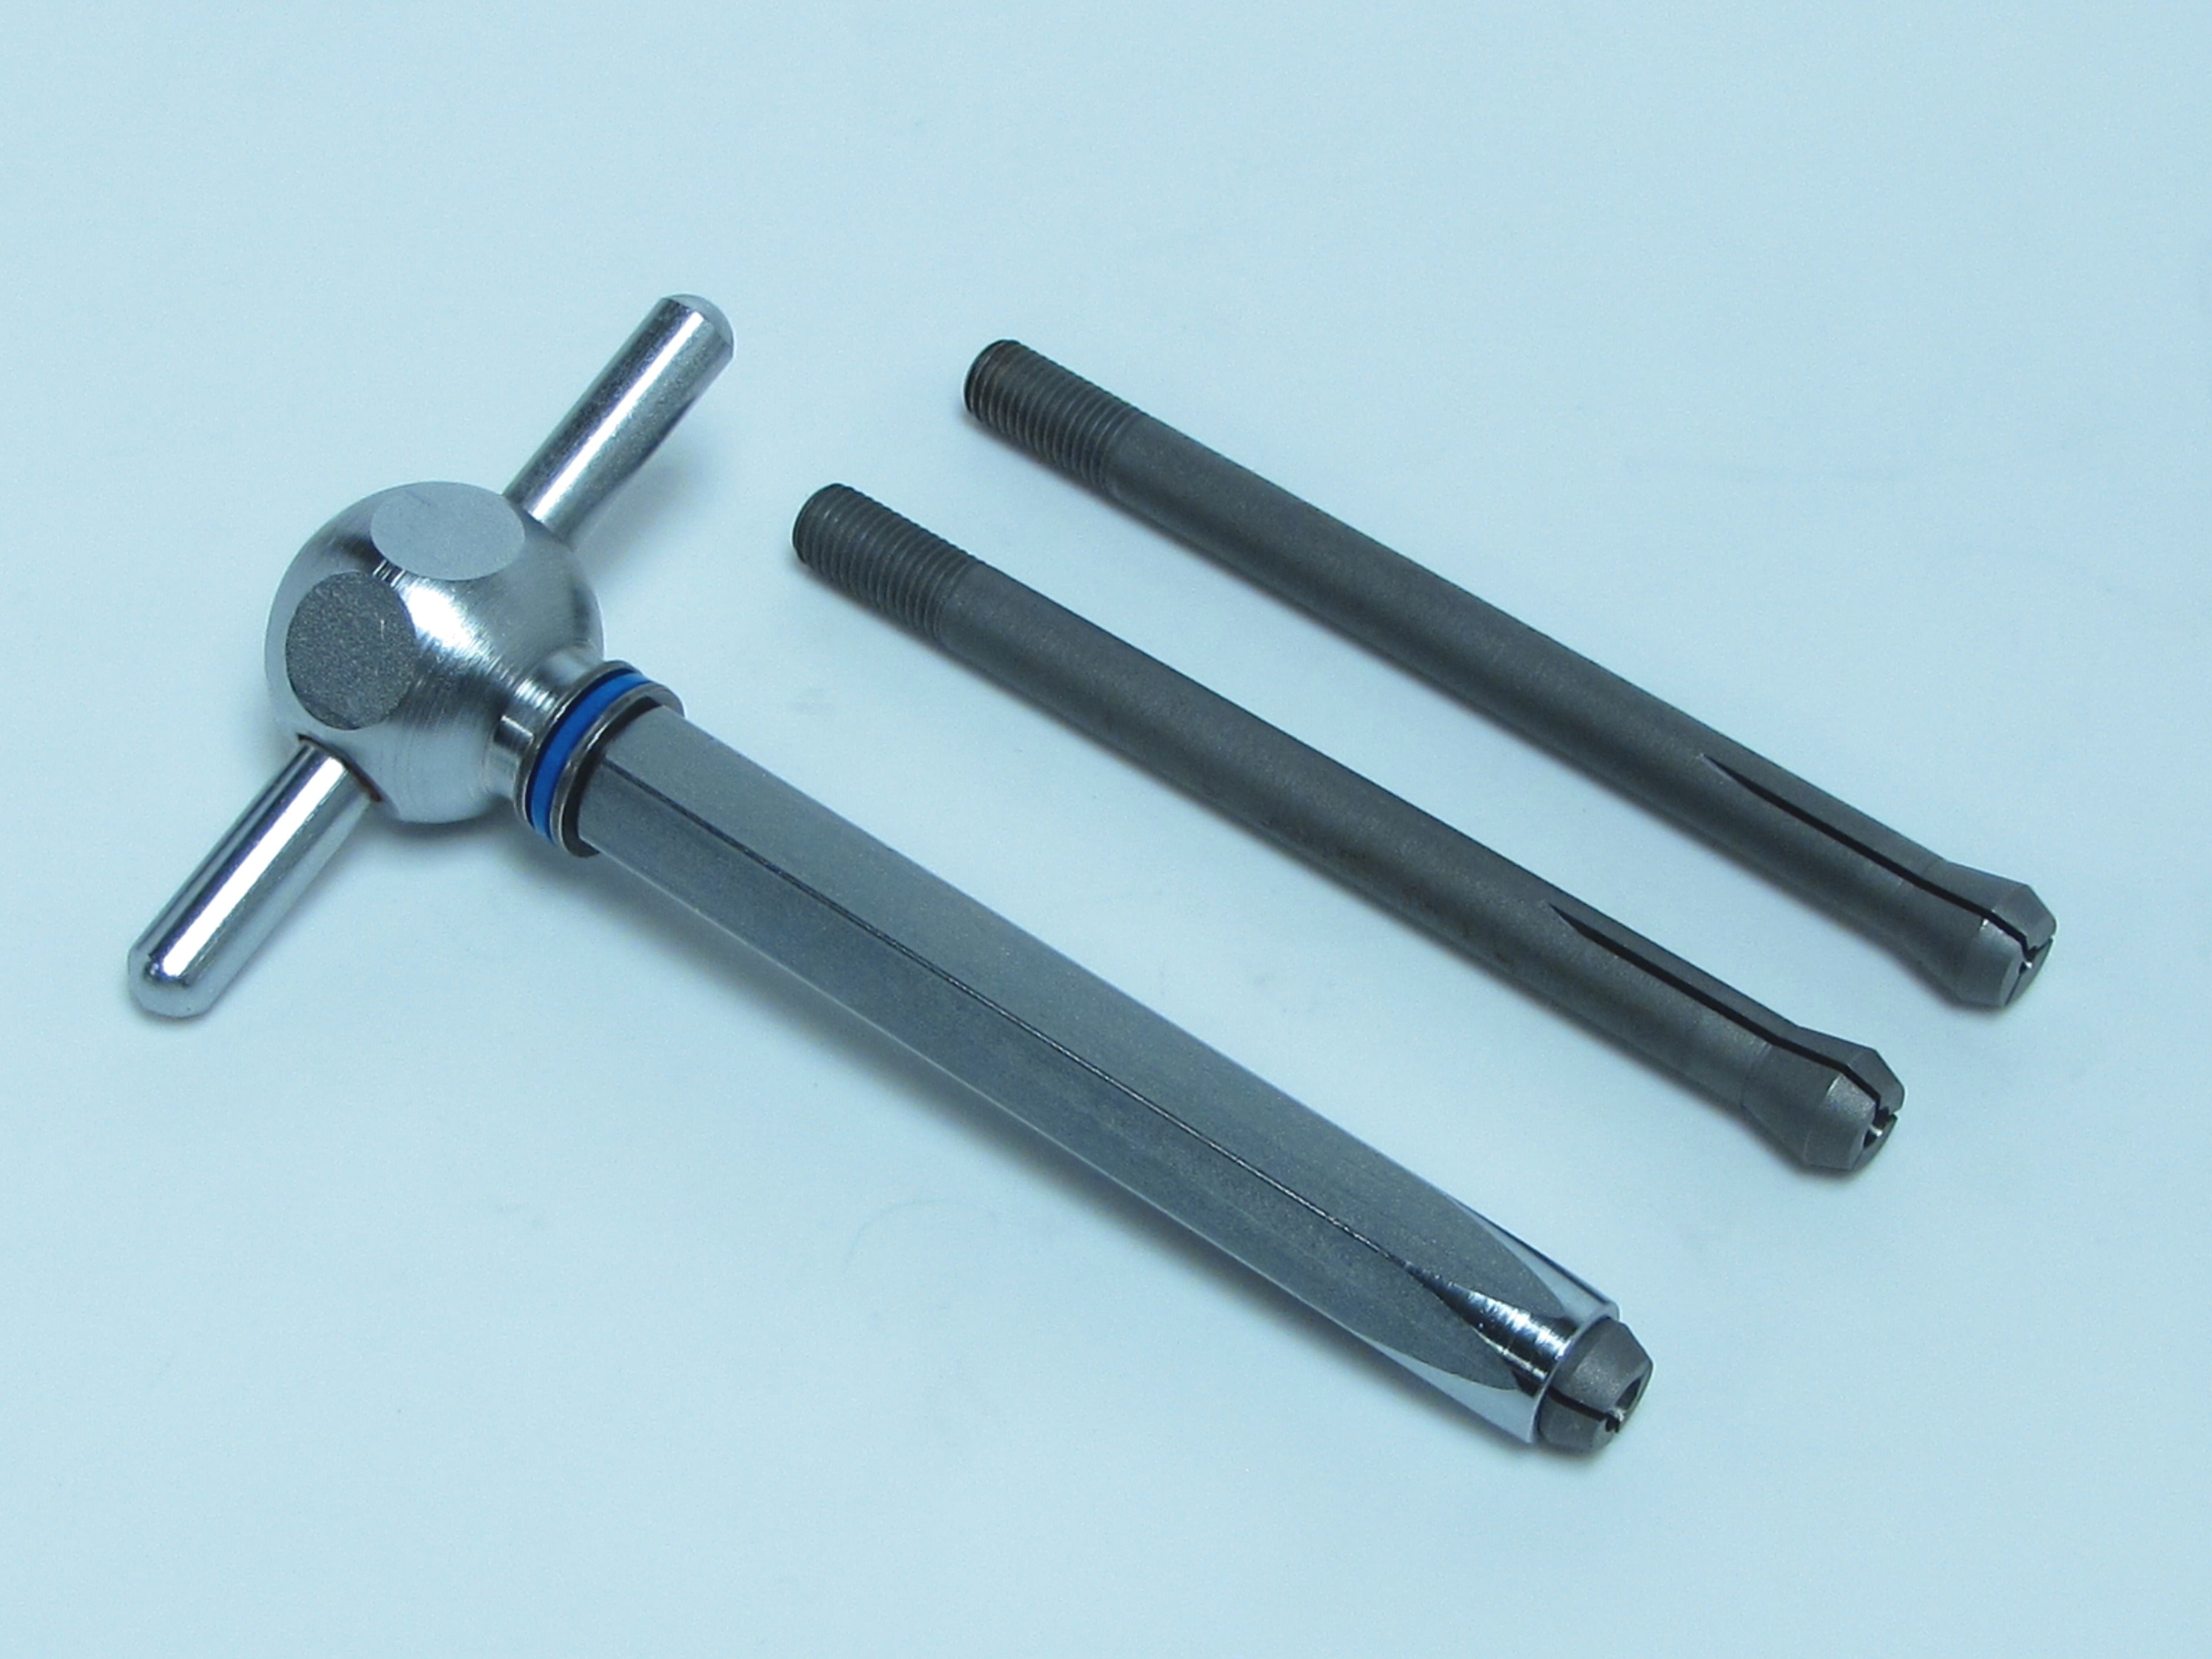 F81 Swedging Tool with Thrust Bearing – Ferree's Tools Inc